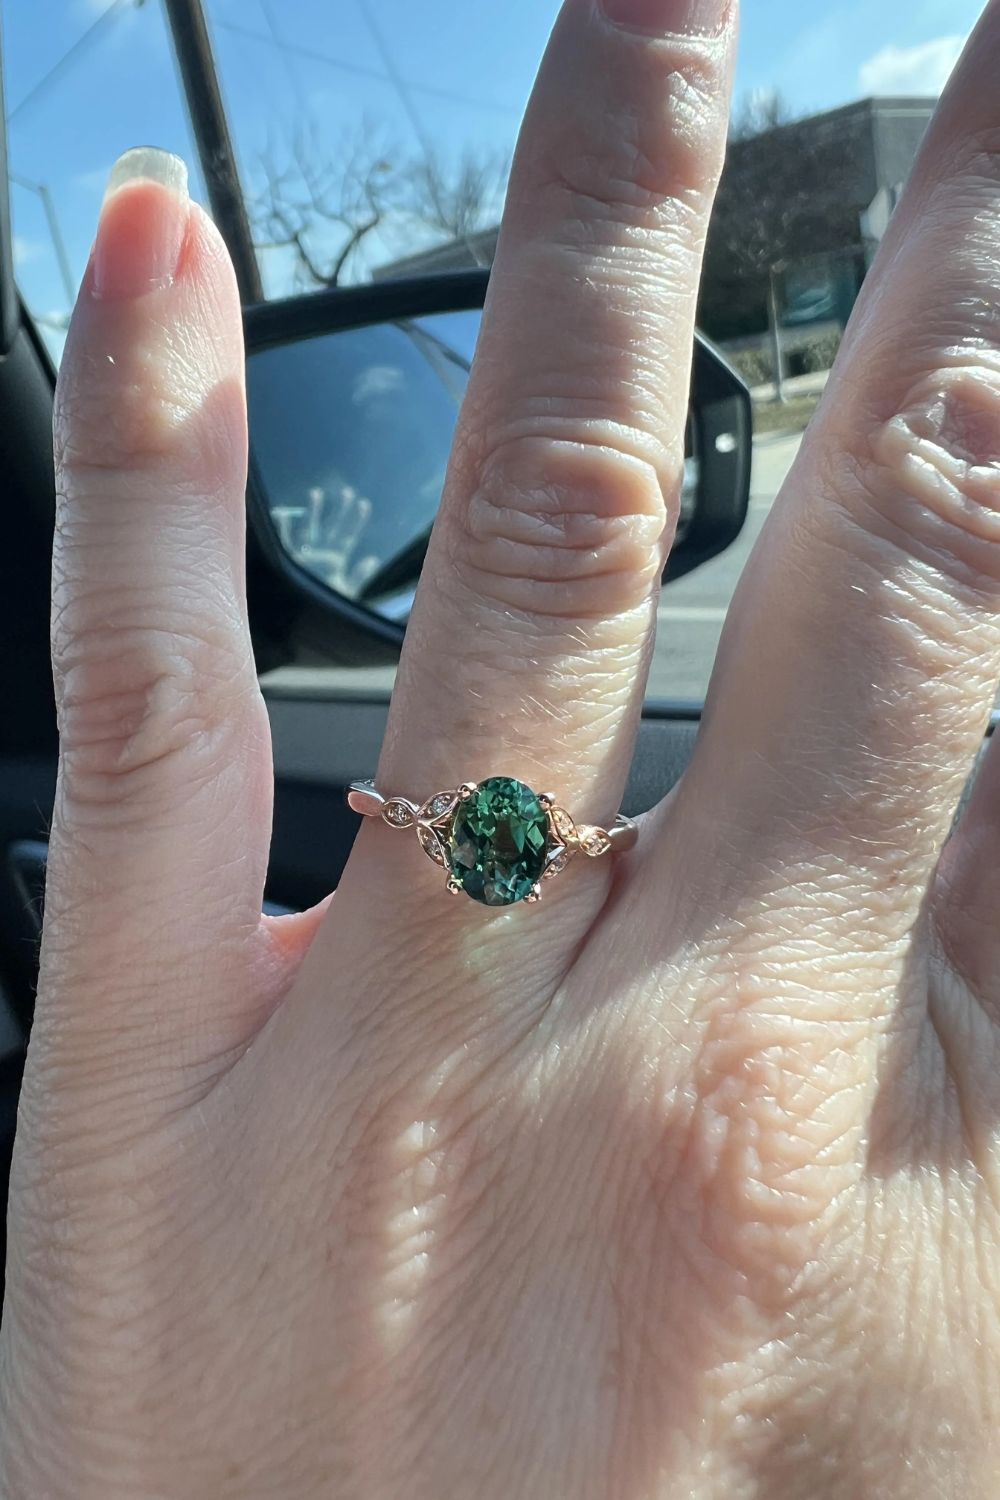 It took a bit but I finally have my dream ring